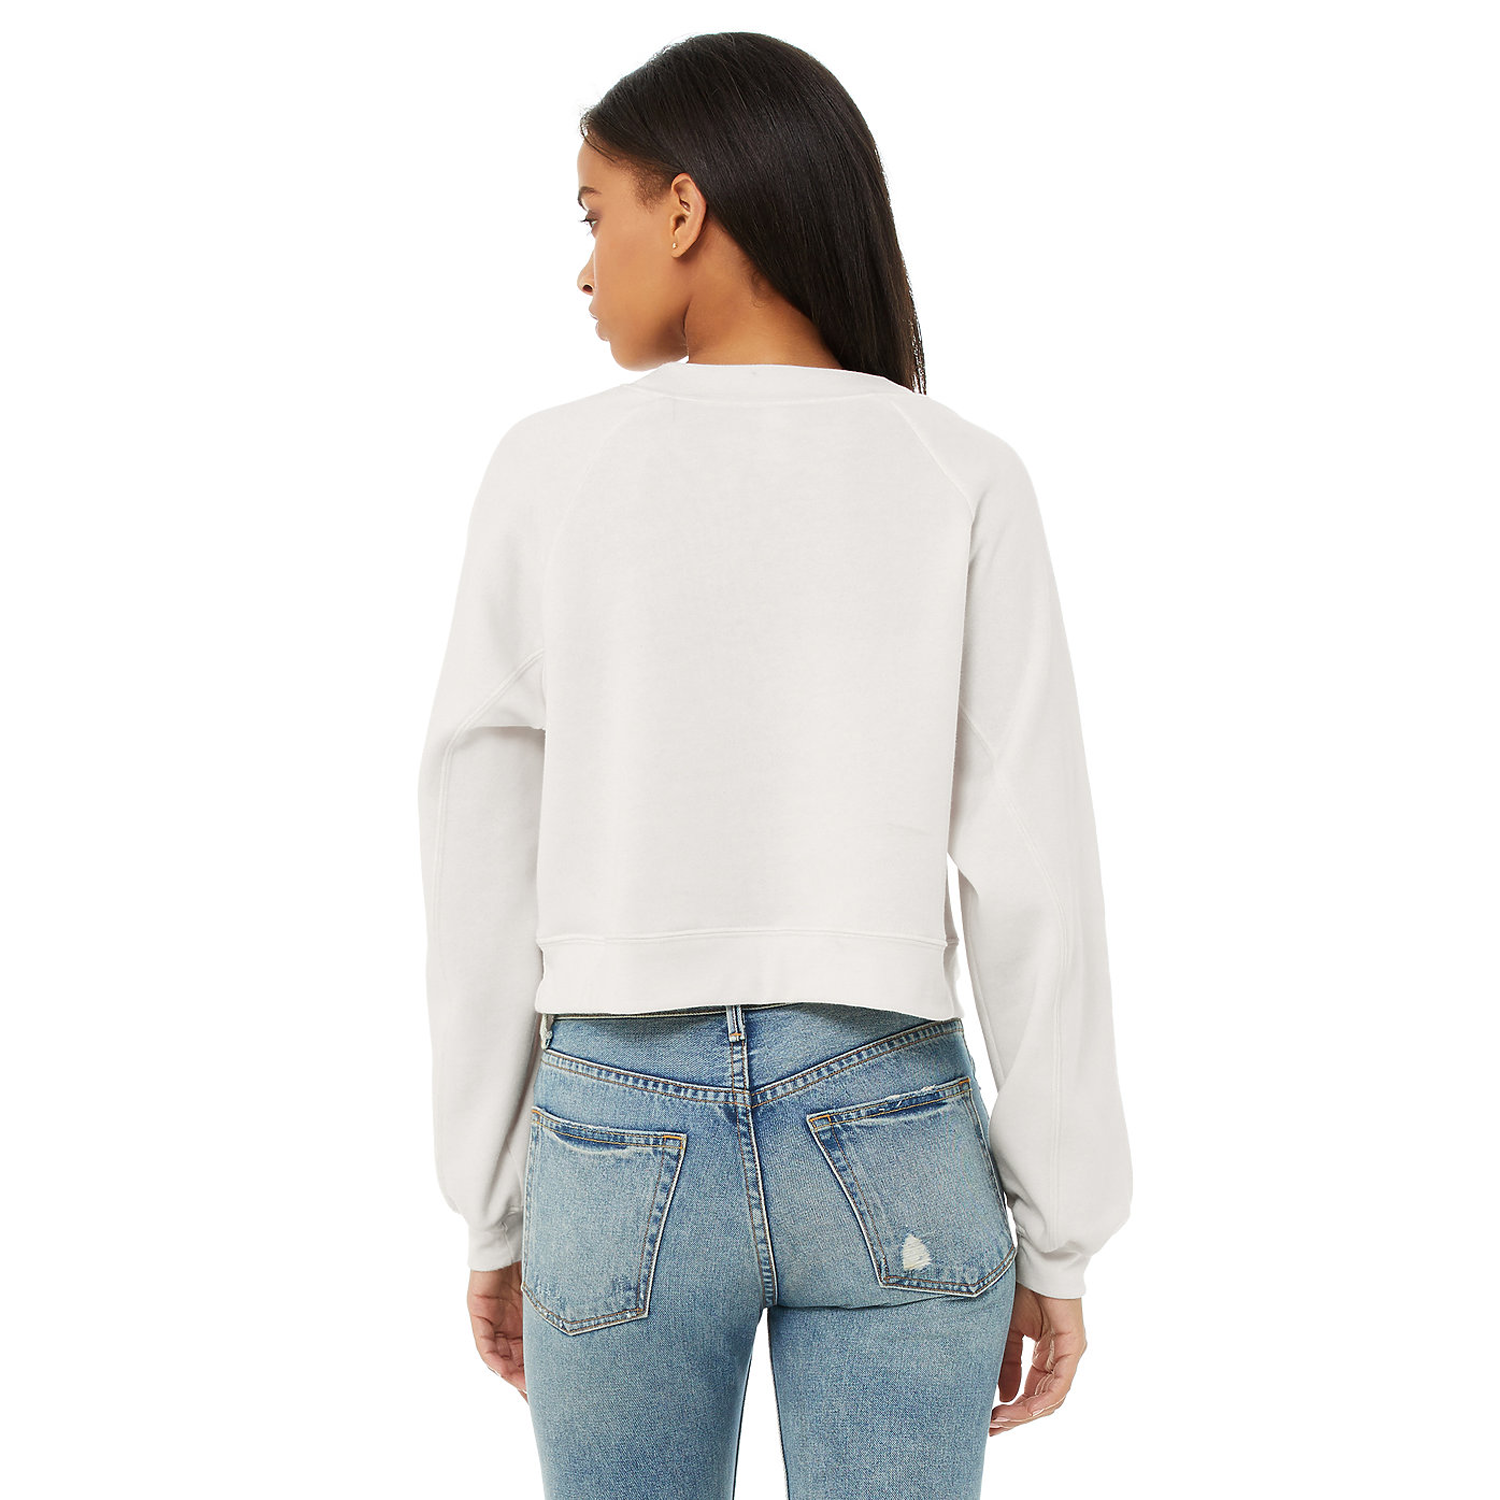 Bella Canvas – 7505 Women’s Crew Pullover – White – Back View – Blank – 1500×1500